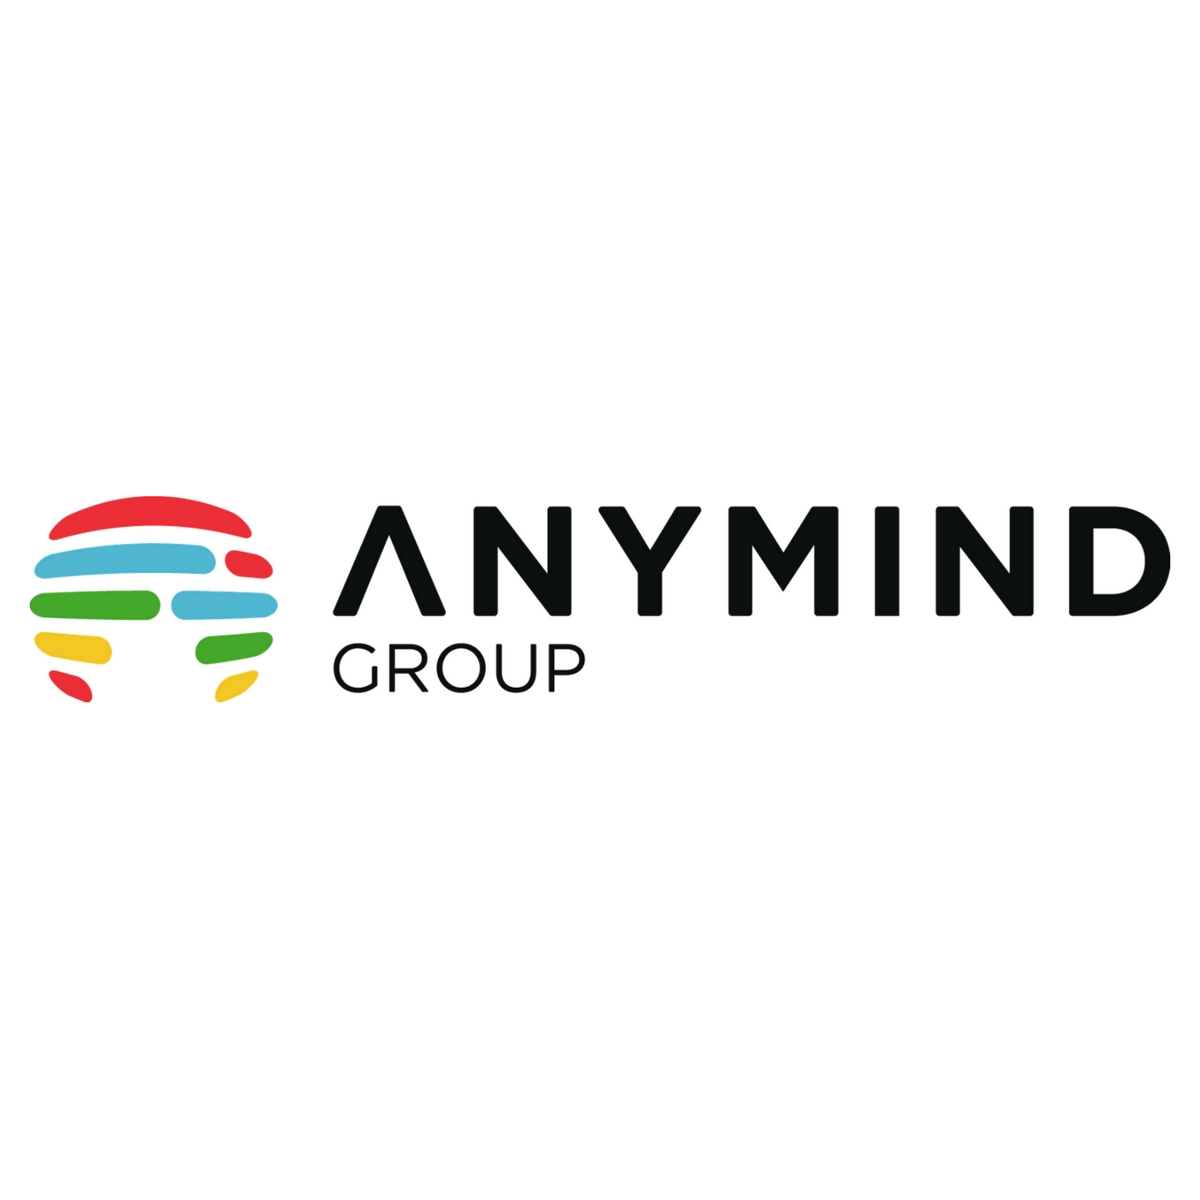 Anymind Group